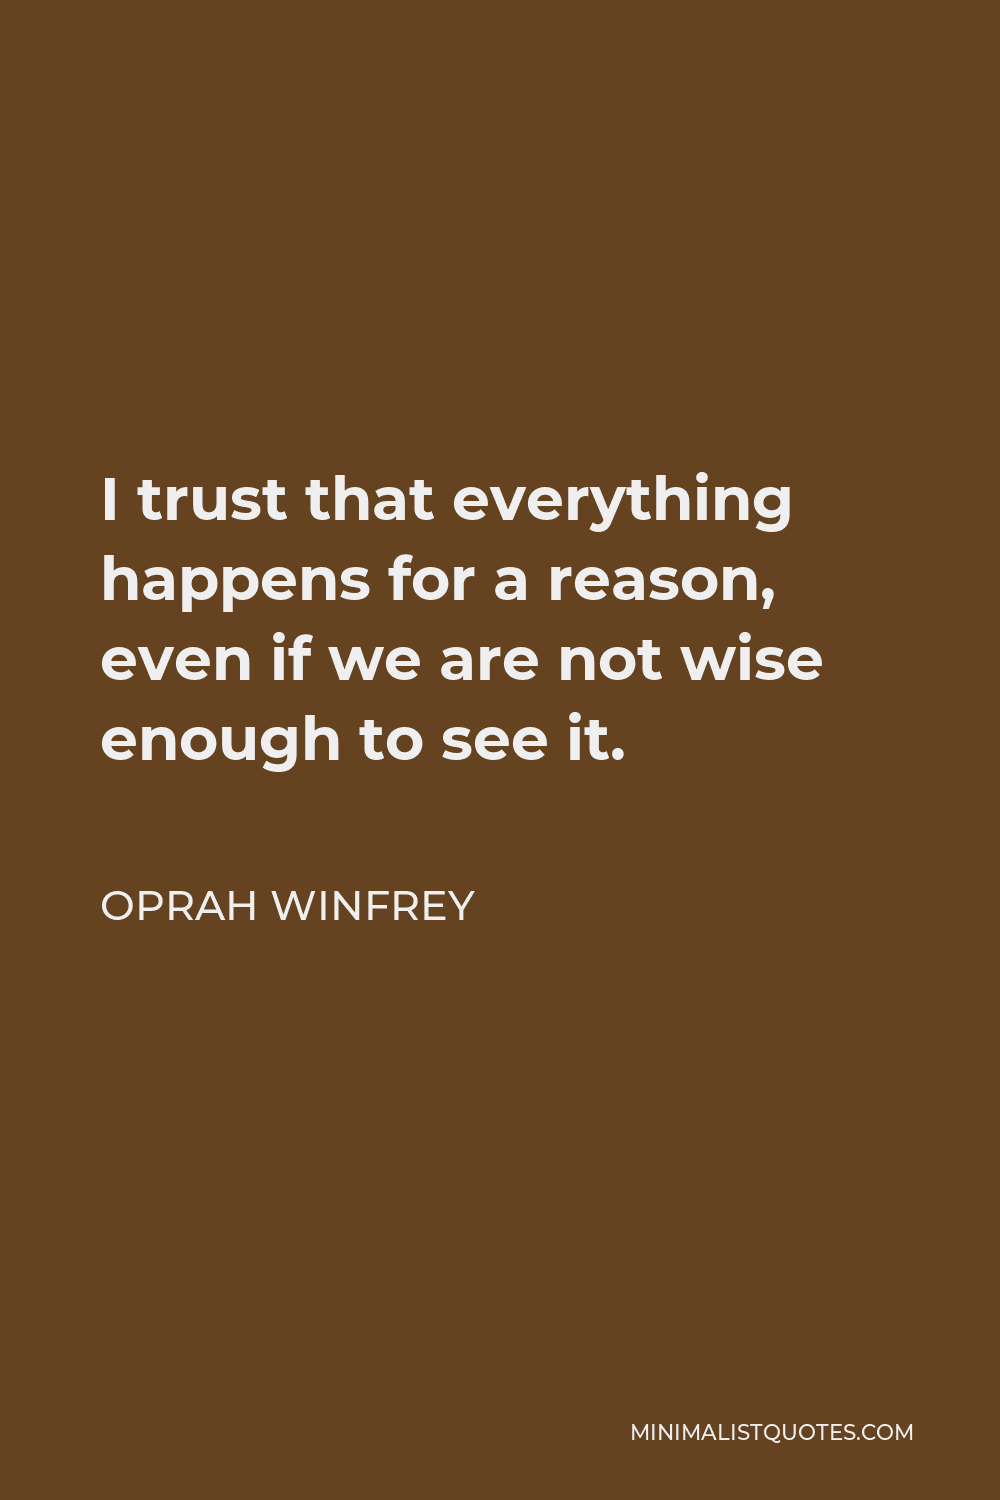 Oprah Winfrey Quote - I trust that everything happens for a reason, even if we are not wise enough to see it.